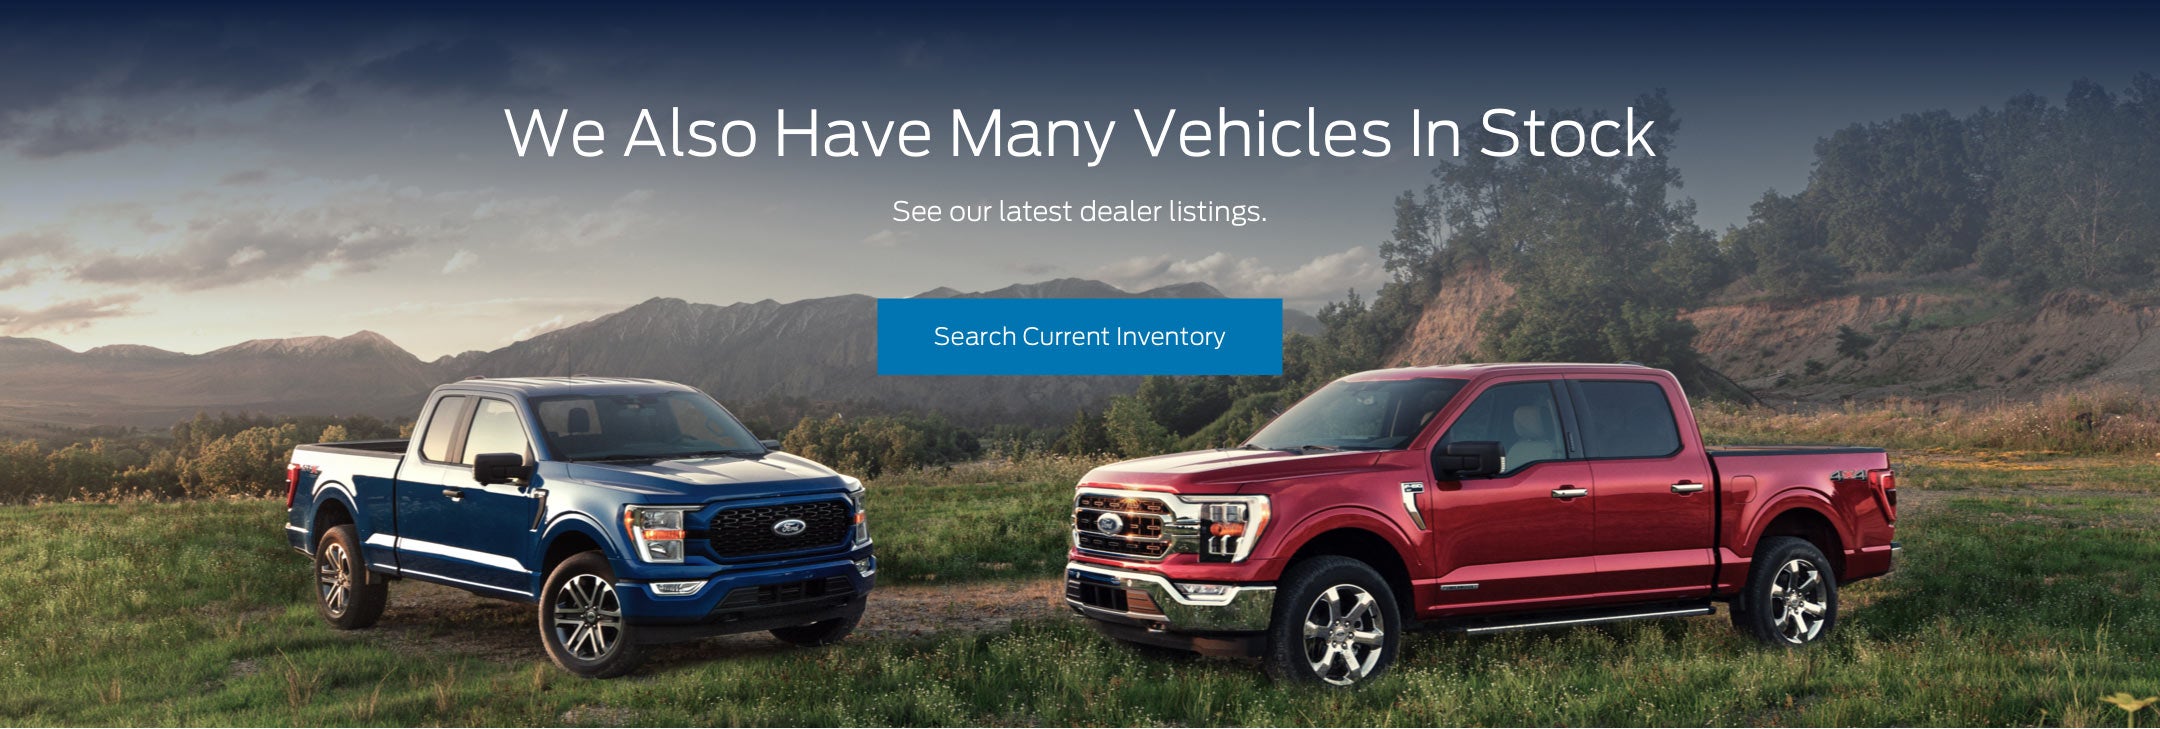 Ford vehicles in stock | Ed Morse Ford St. Robert in Saint Robert MO